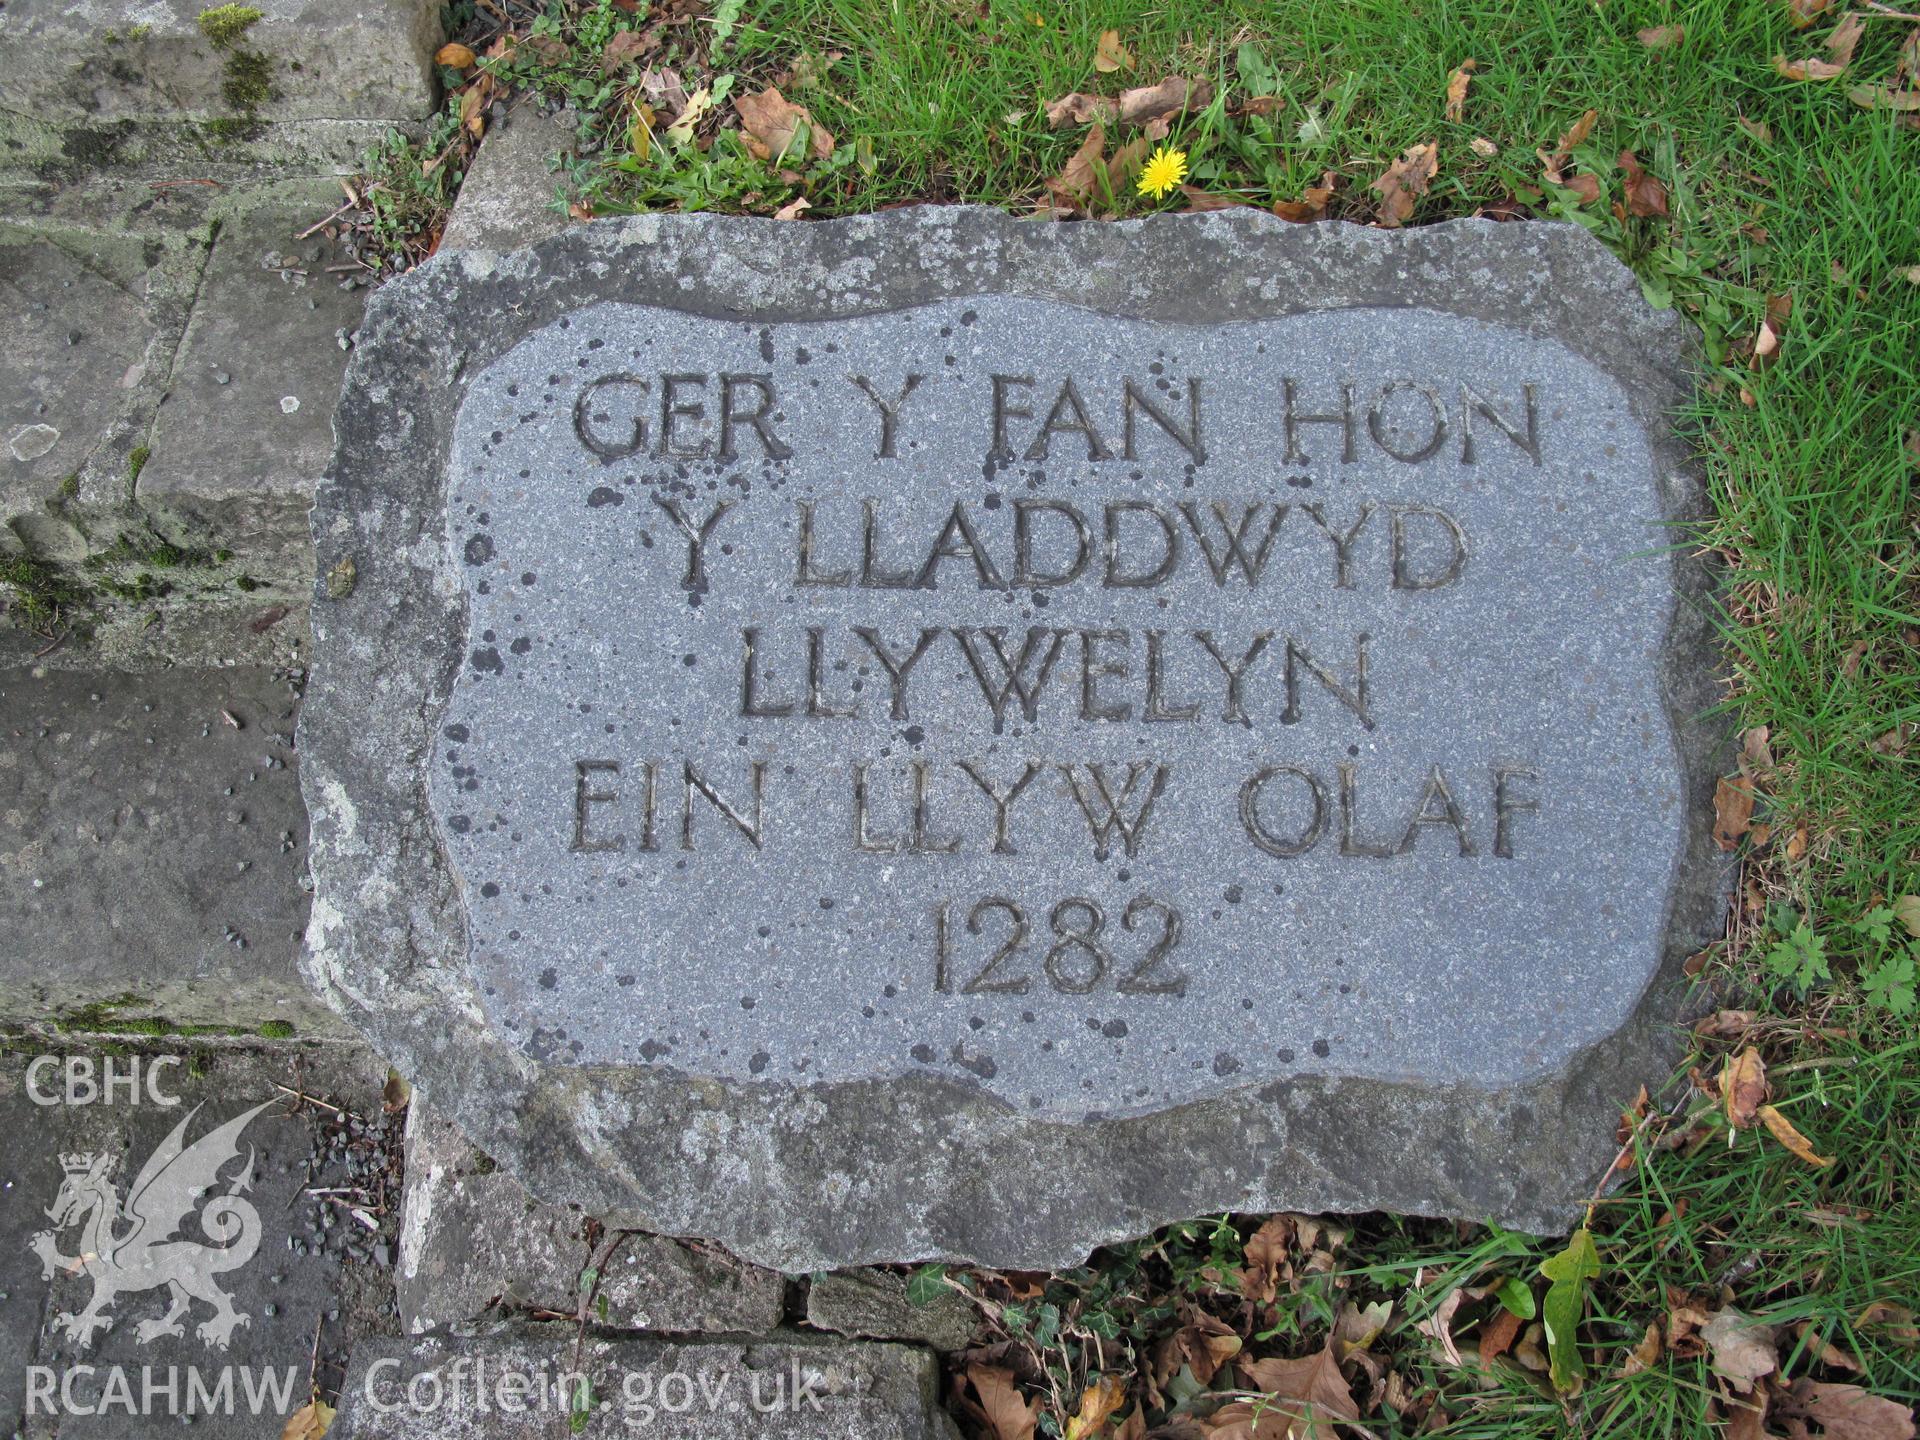 Detail of Welsh stone, Llywelyn Monument, Cilmeri, taken by Brian Malaws on 27 September 2010.